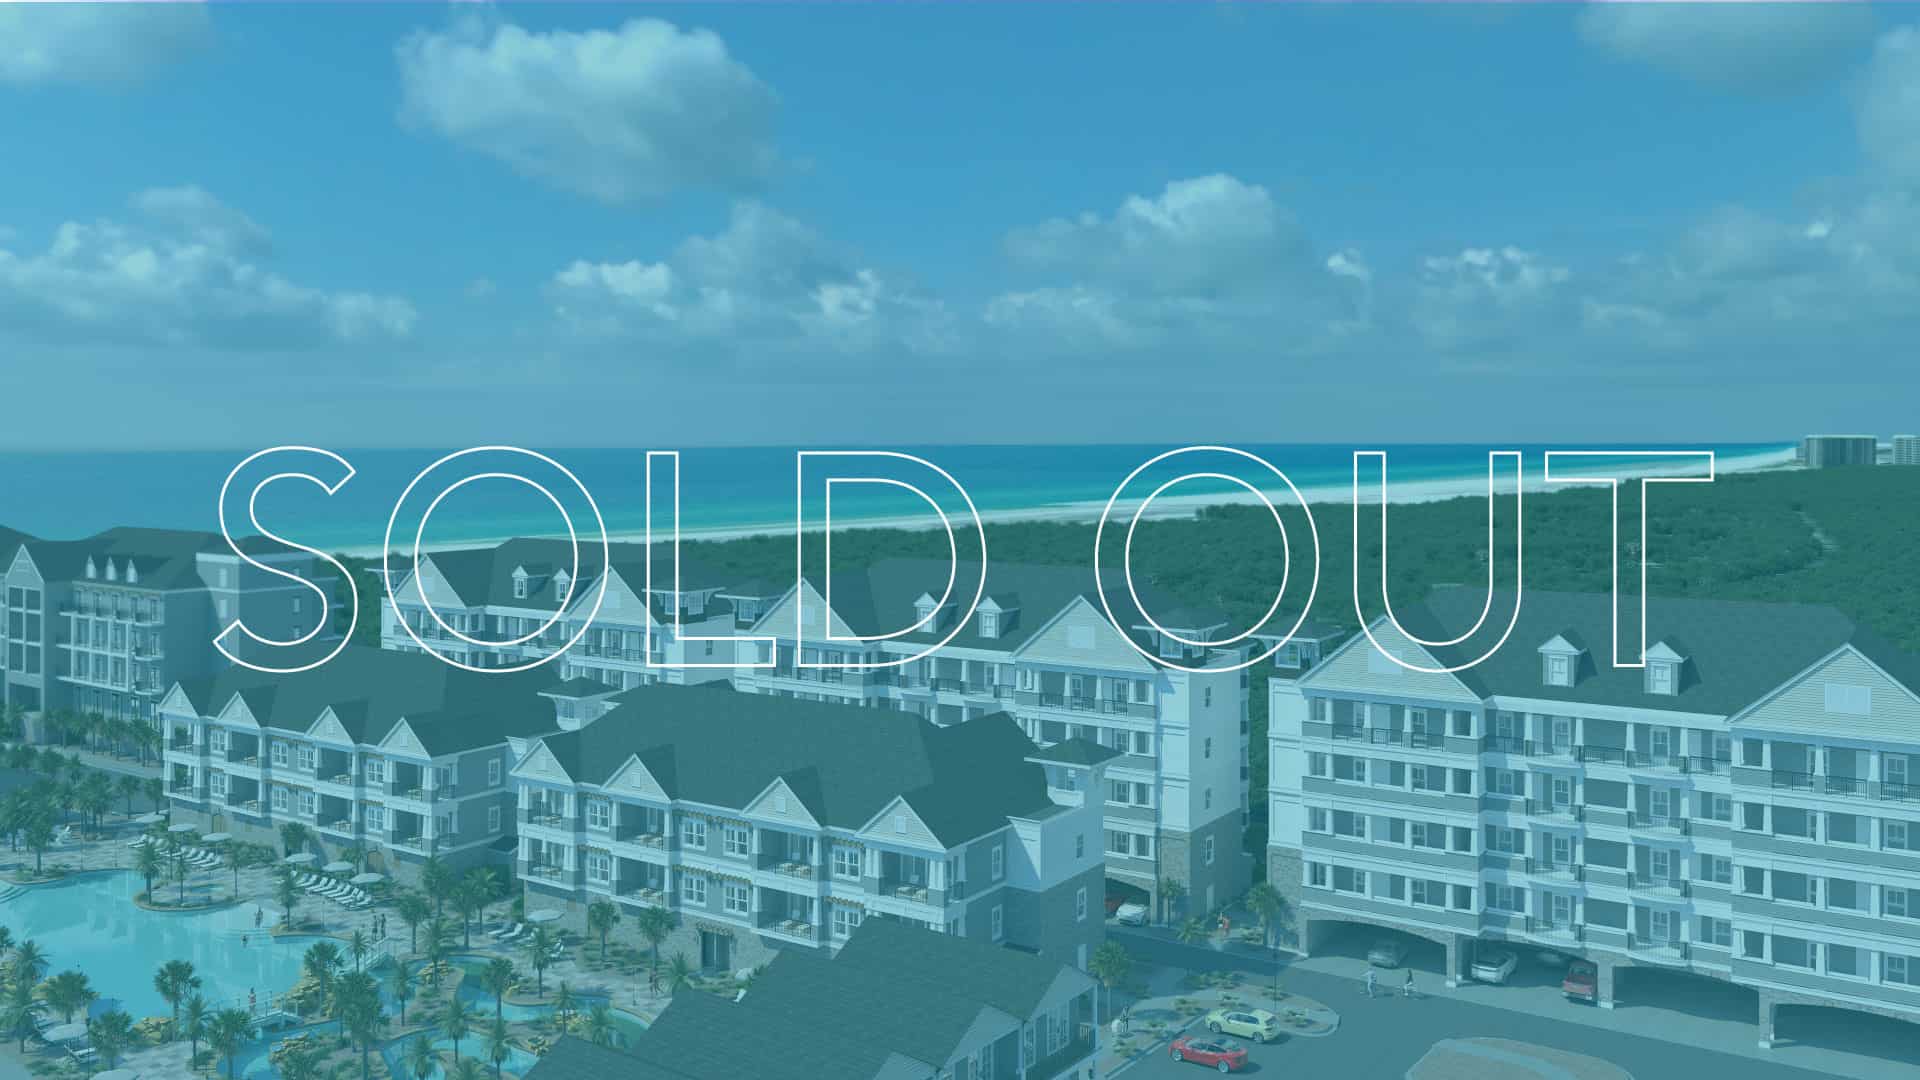 Parkside is sold out!